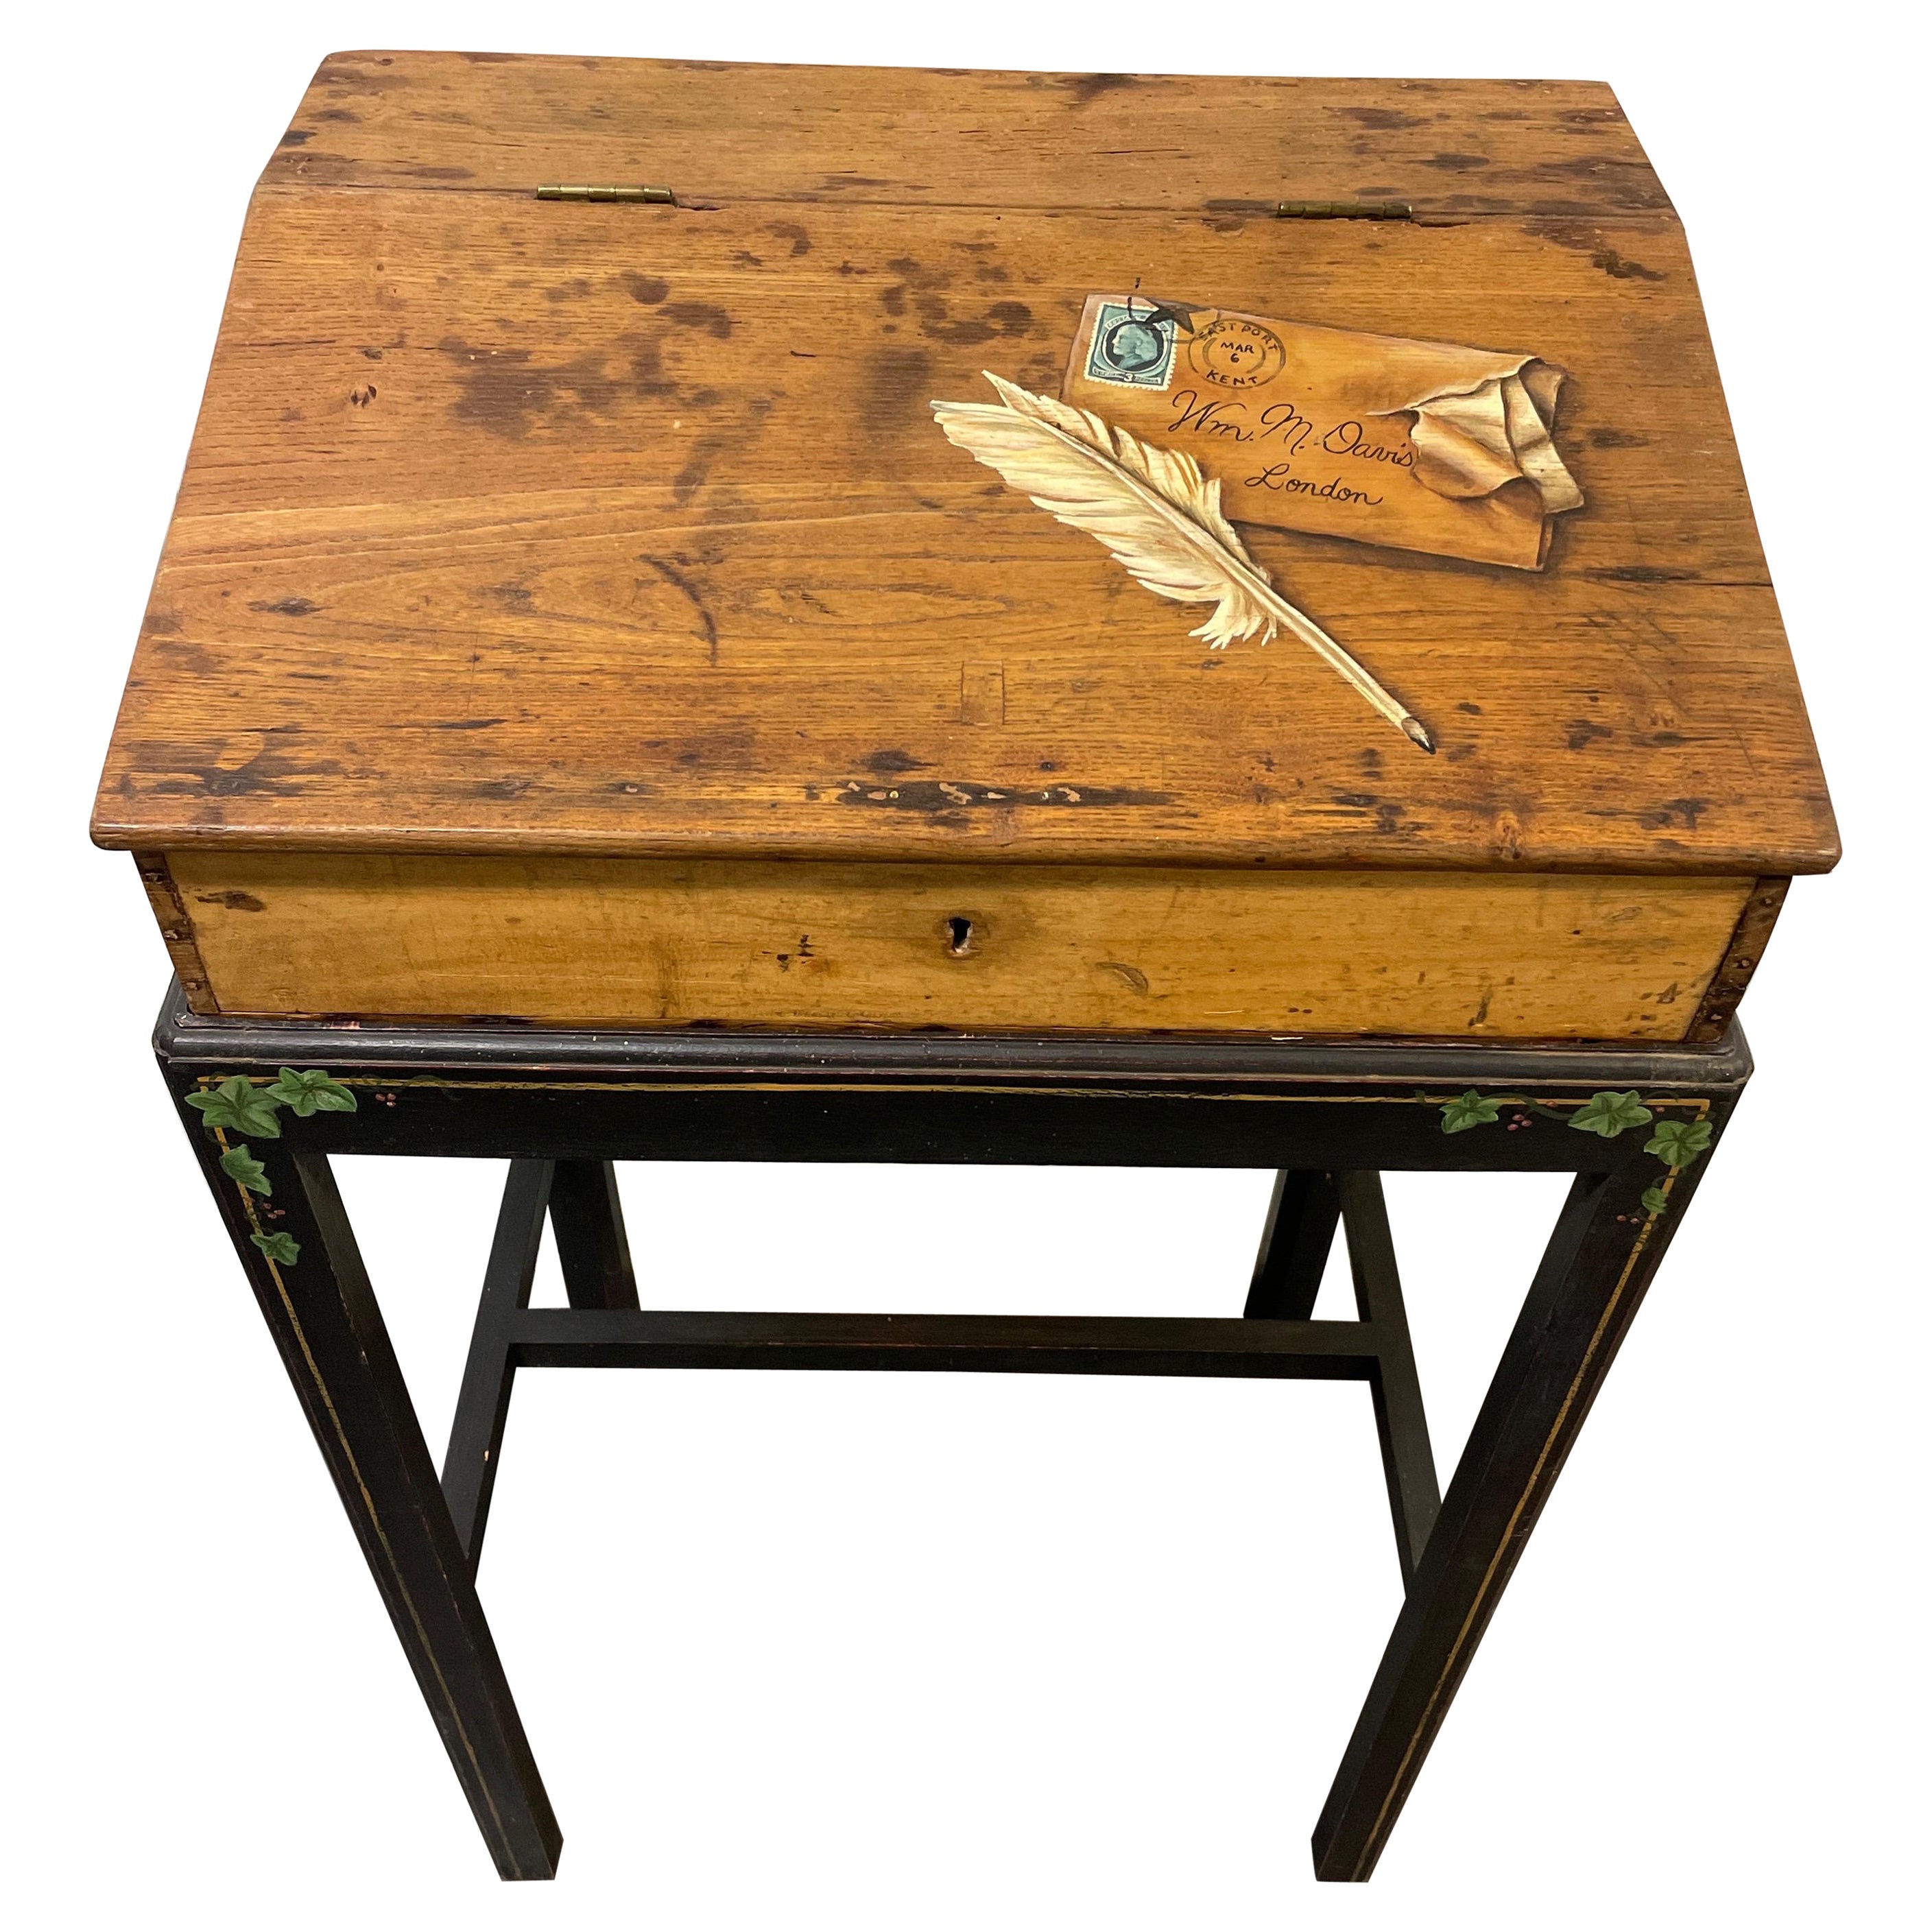 English Trompe I'oeil Painted Lap Desk on Stand